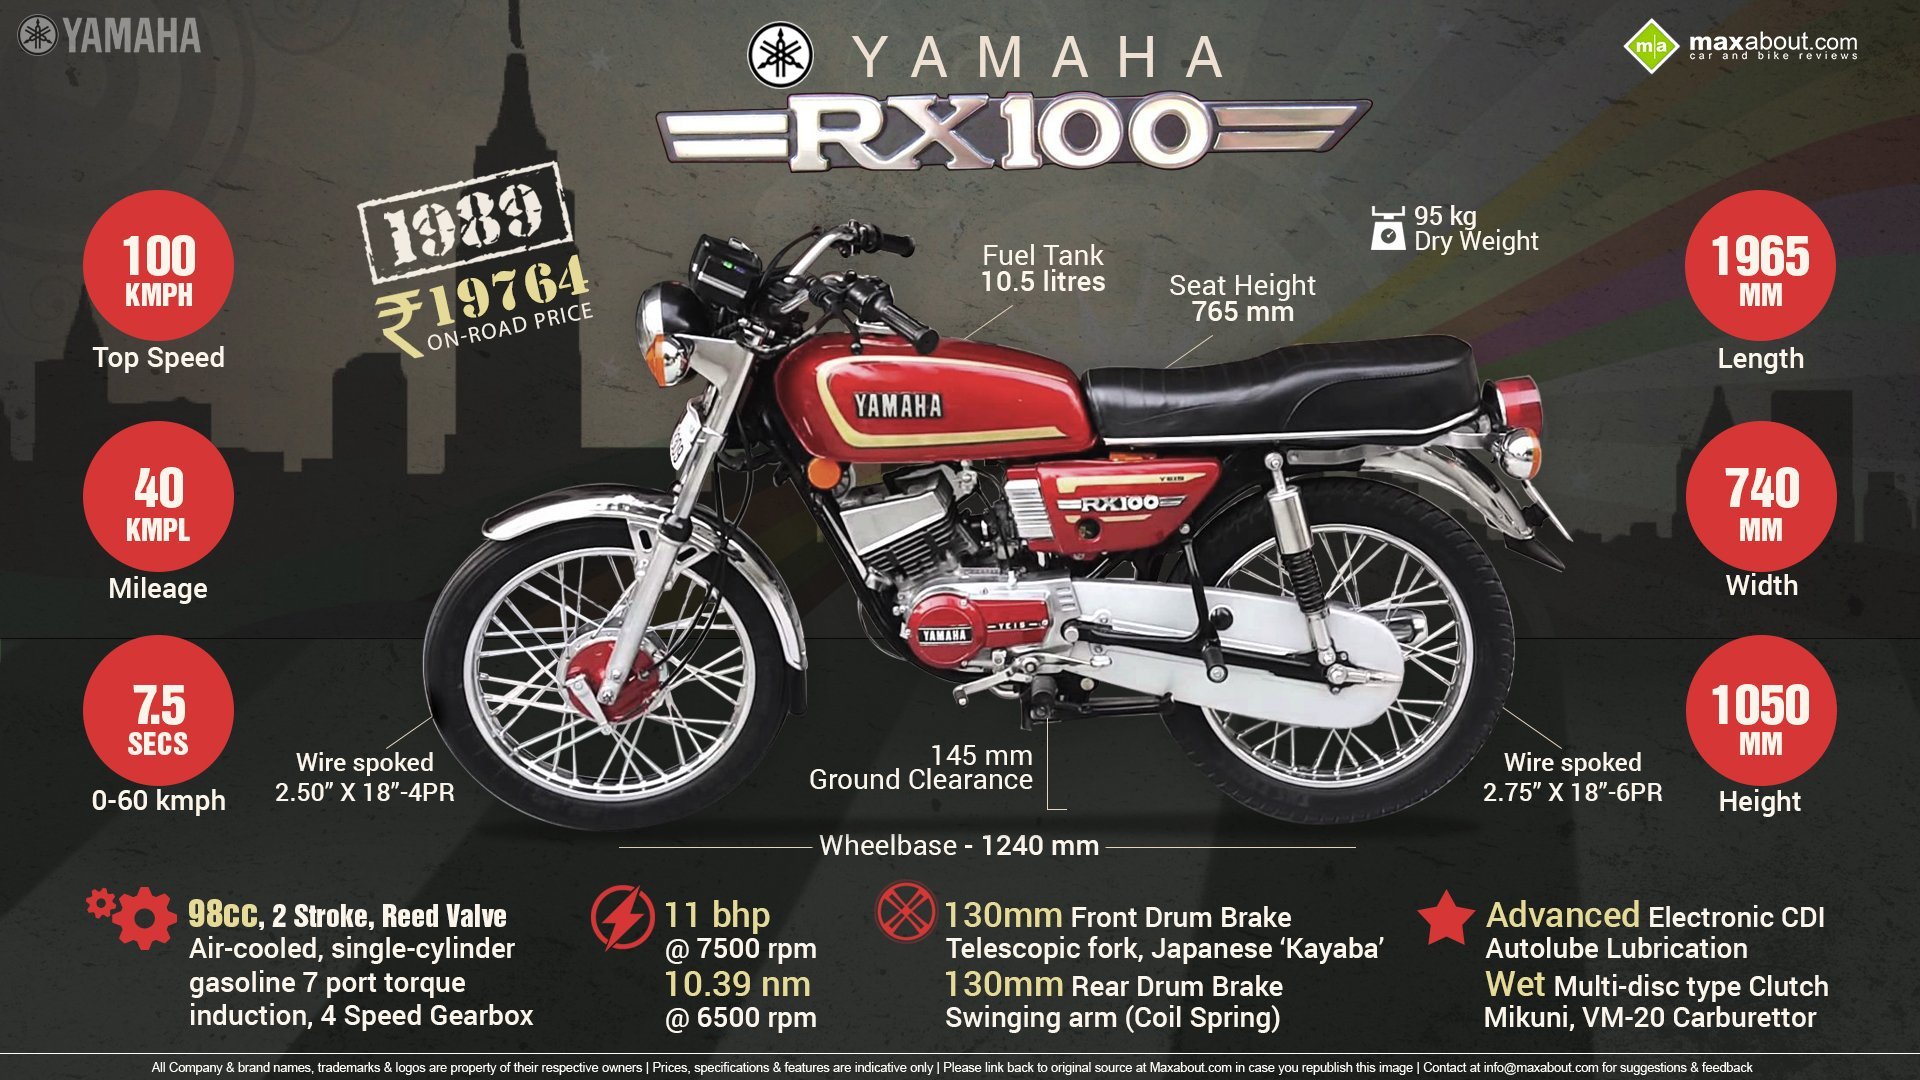 Yamaha Rx 100 Yamaha Is Going To Launch A Bike At A Price Of Rs